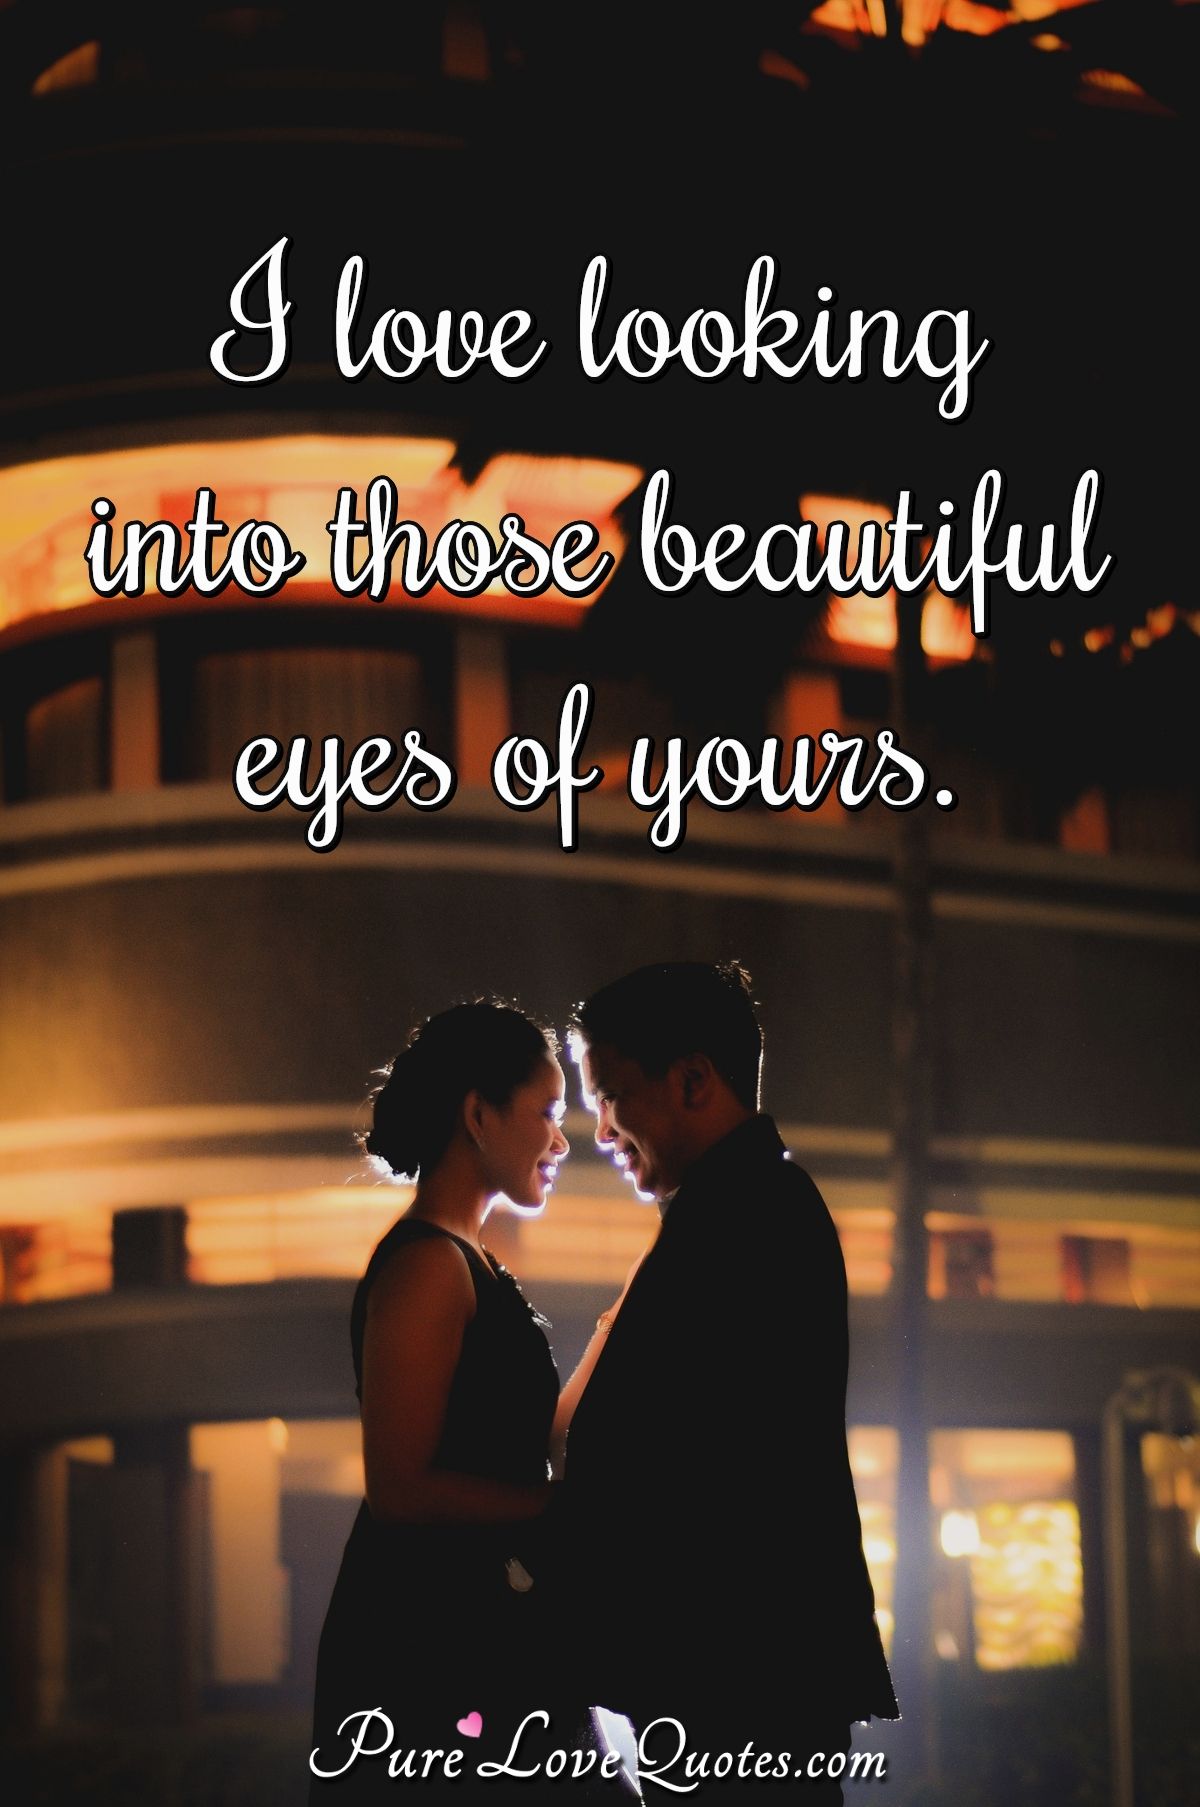 I love looking into those beautiful eyes of yours. - Anonymous